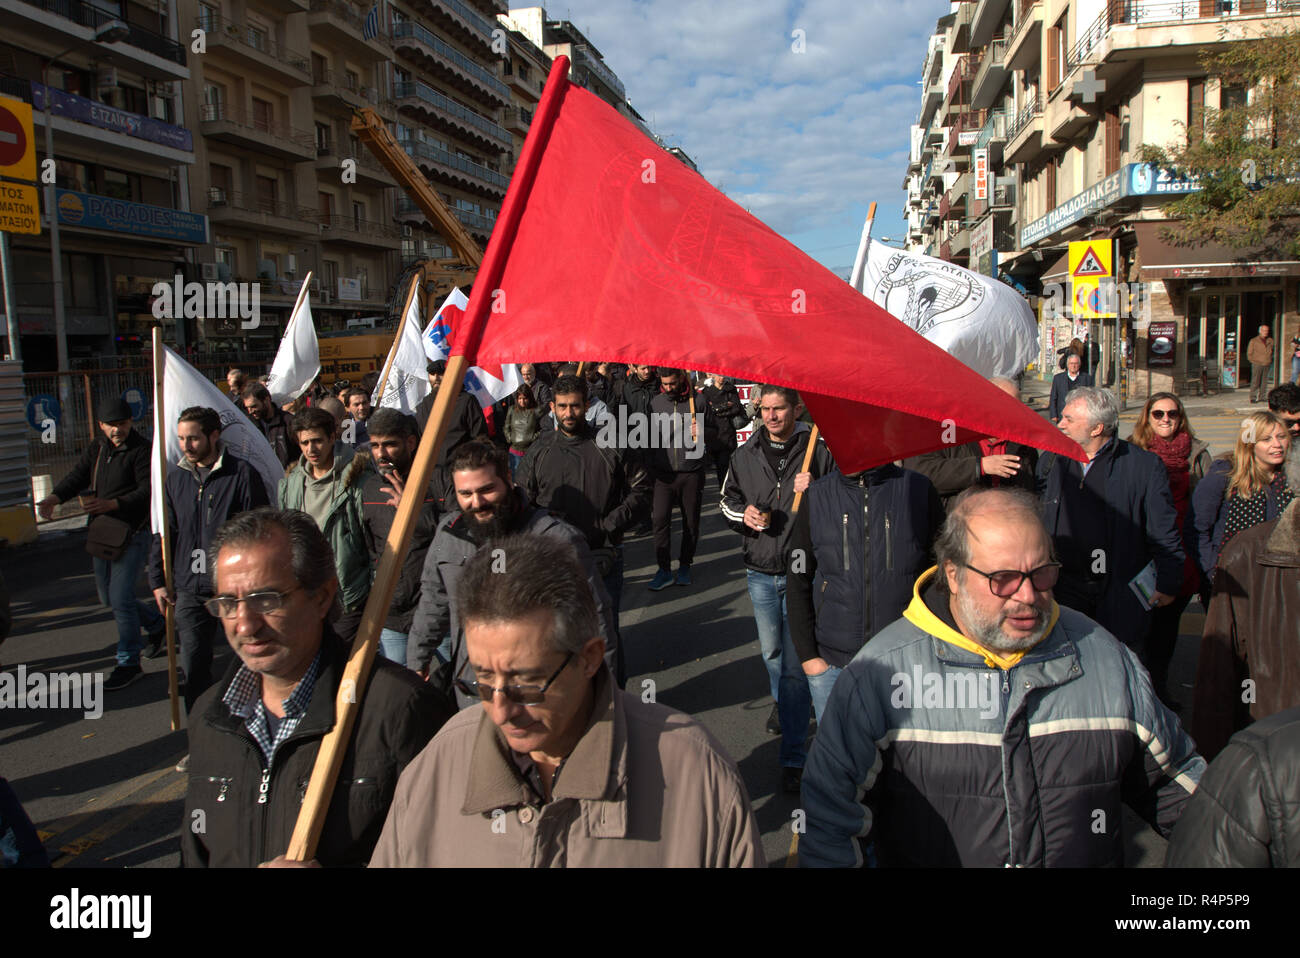 Thessaloniki, Greece, 28th November, 2018.  Protesters from the PAME trade union take part in a demonstration during a 24-hour walkout staged by Greece's largest private sector union GSEE  against planned pension cuts and to demand the reversal of labour reforms implemented under the country's third bailout. The strike by the GSEE union is the second major strike since Greece exited its bailout programm in August. Credit : Orhan Tsolak / Alamy Live News. Stock Photo